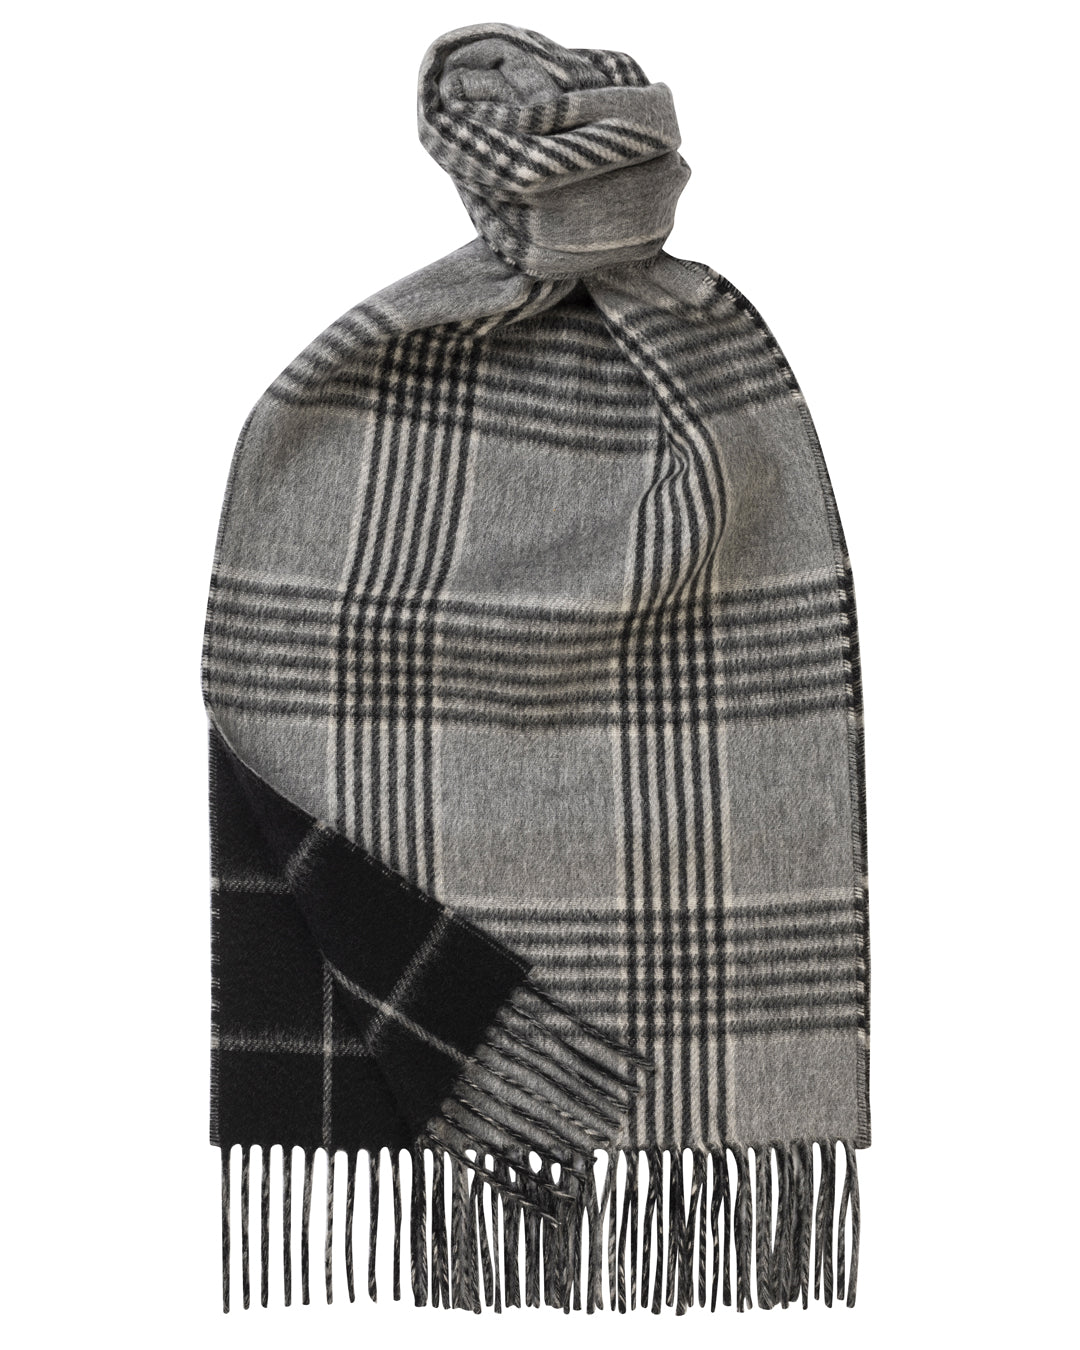 SALE - Double Faced Ripple Cashmere Scarf